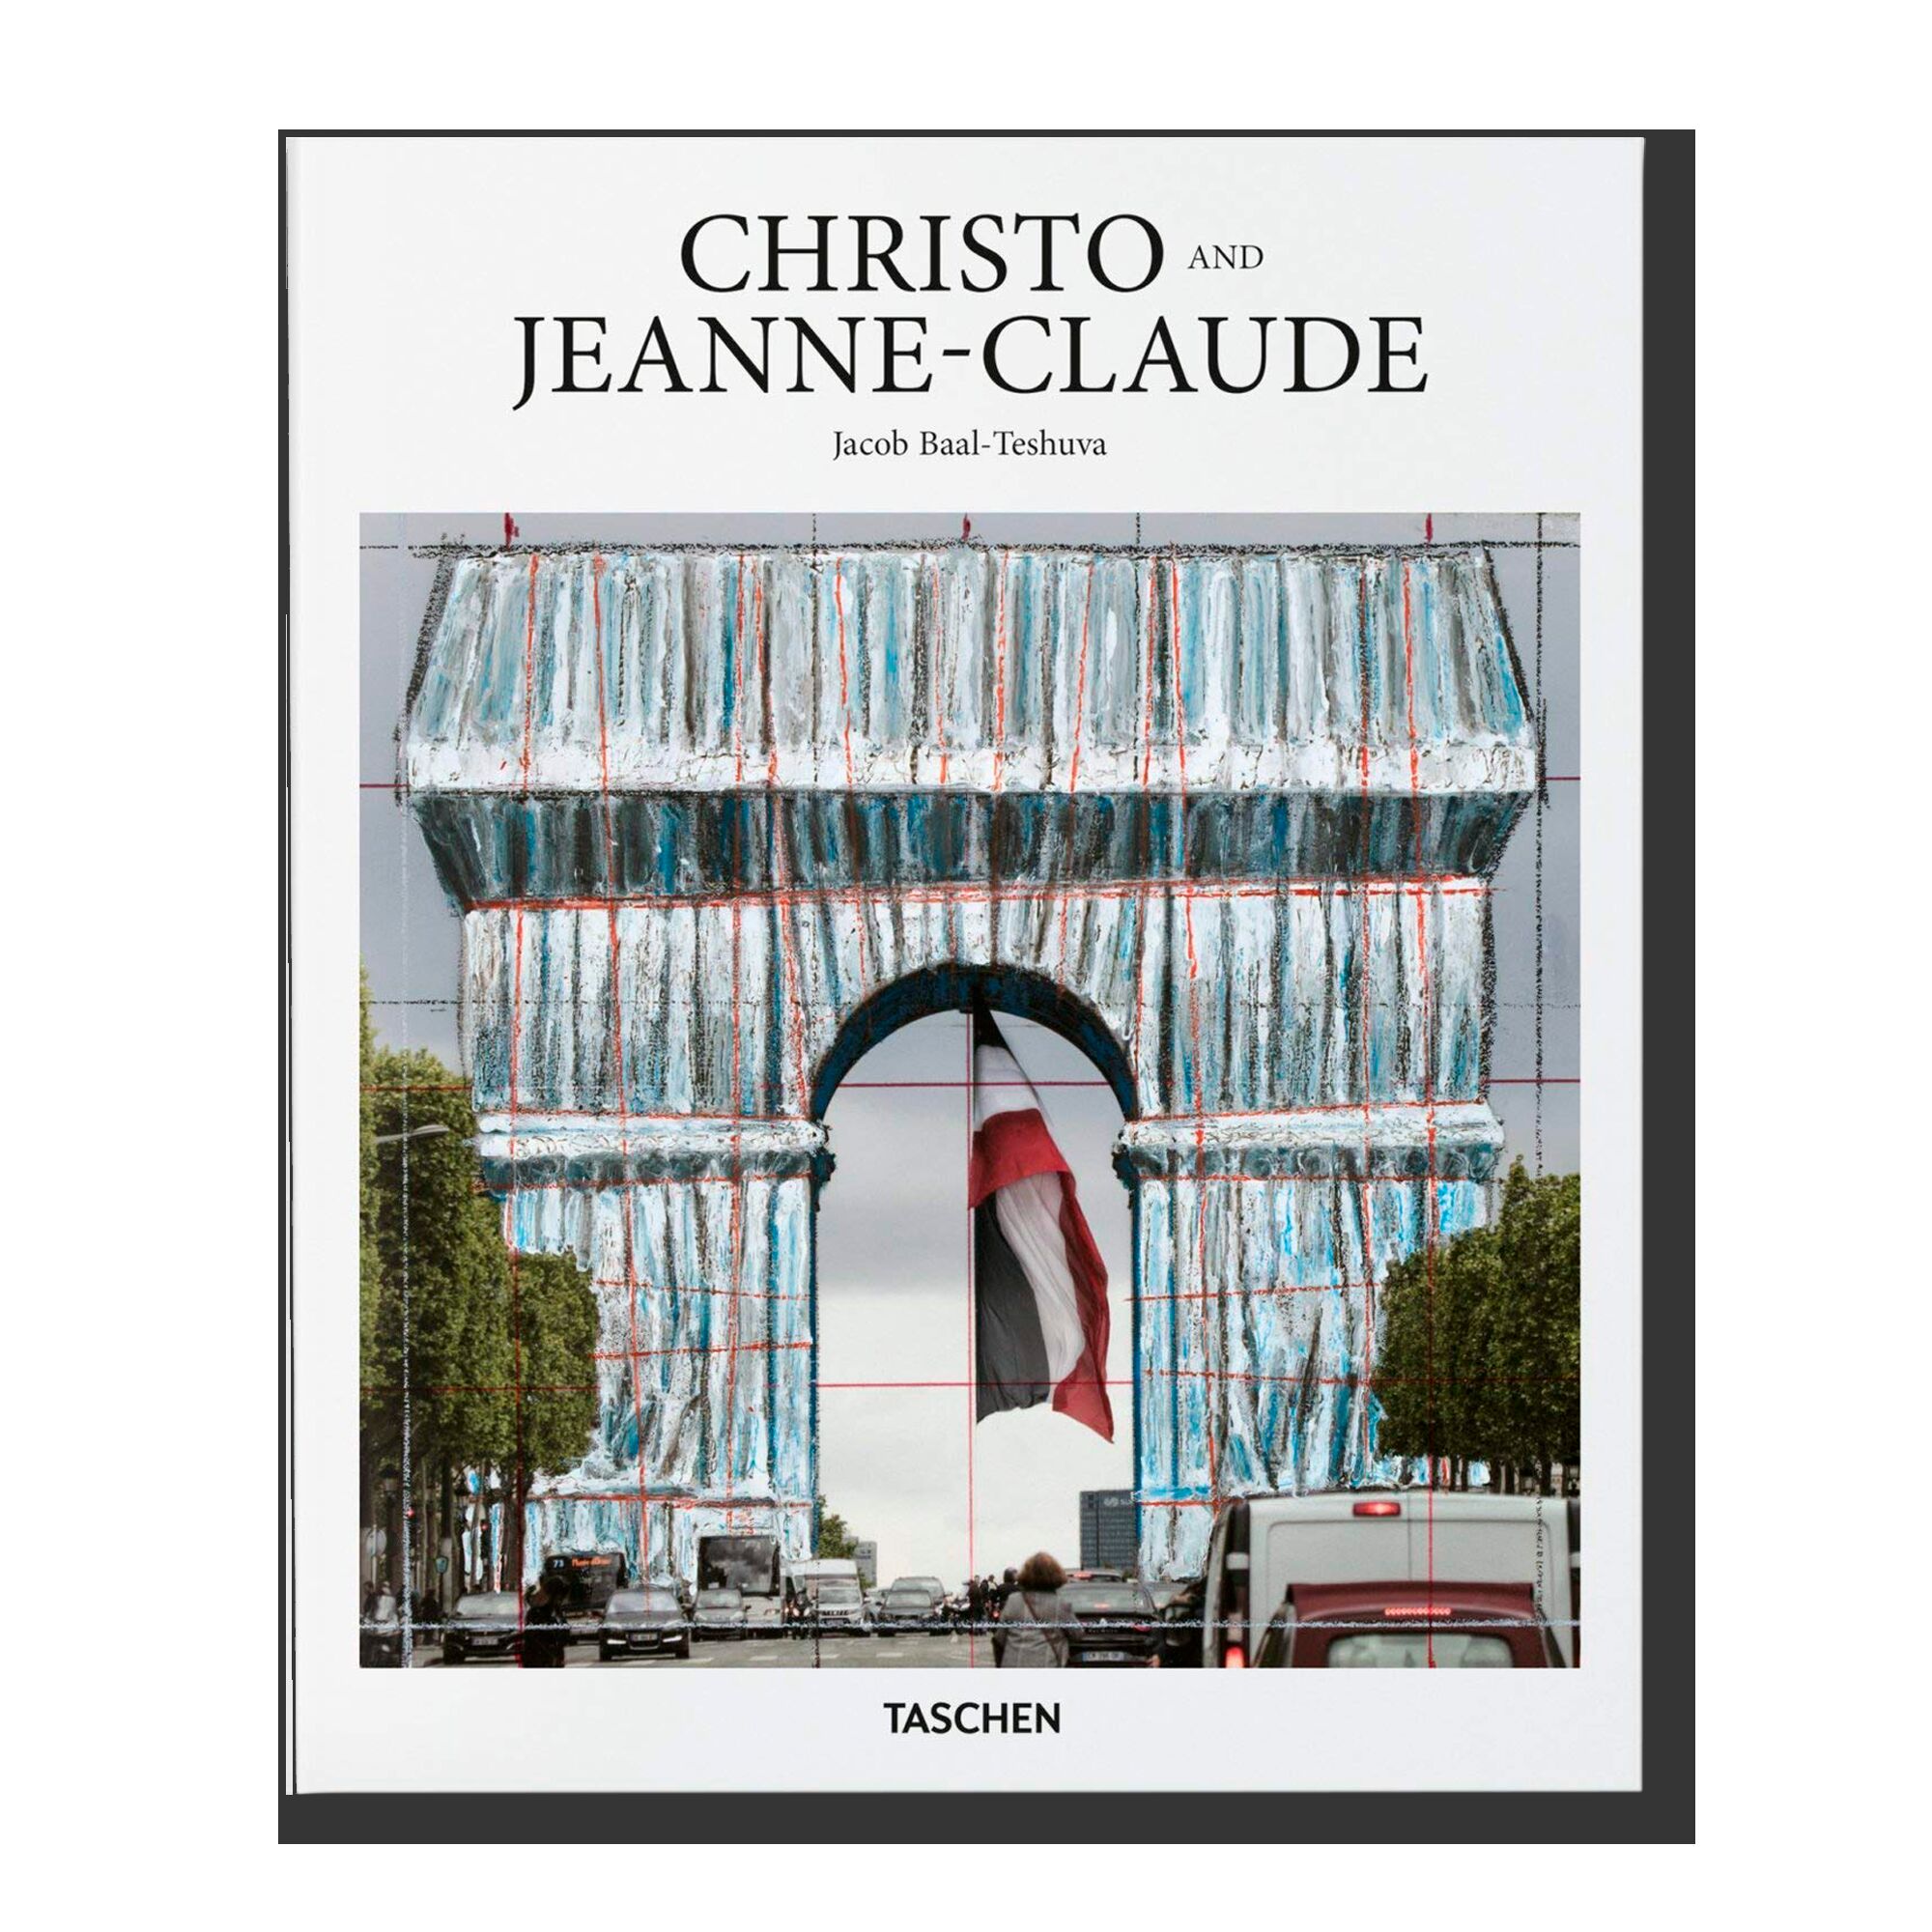 Christo and Jeanne-Claude (Basic Art Series)